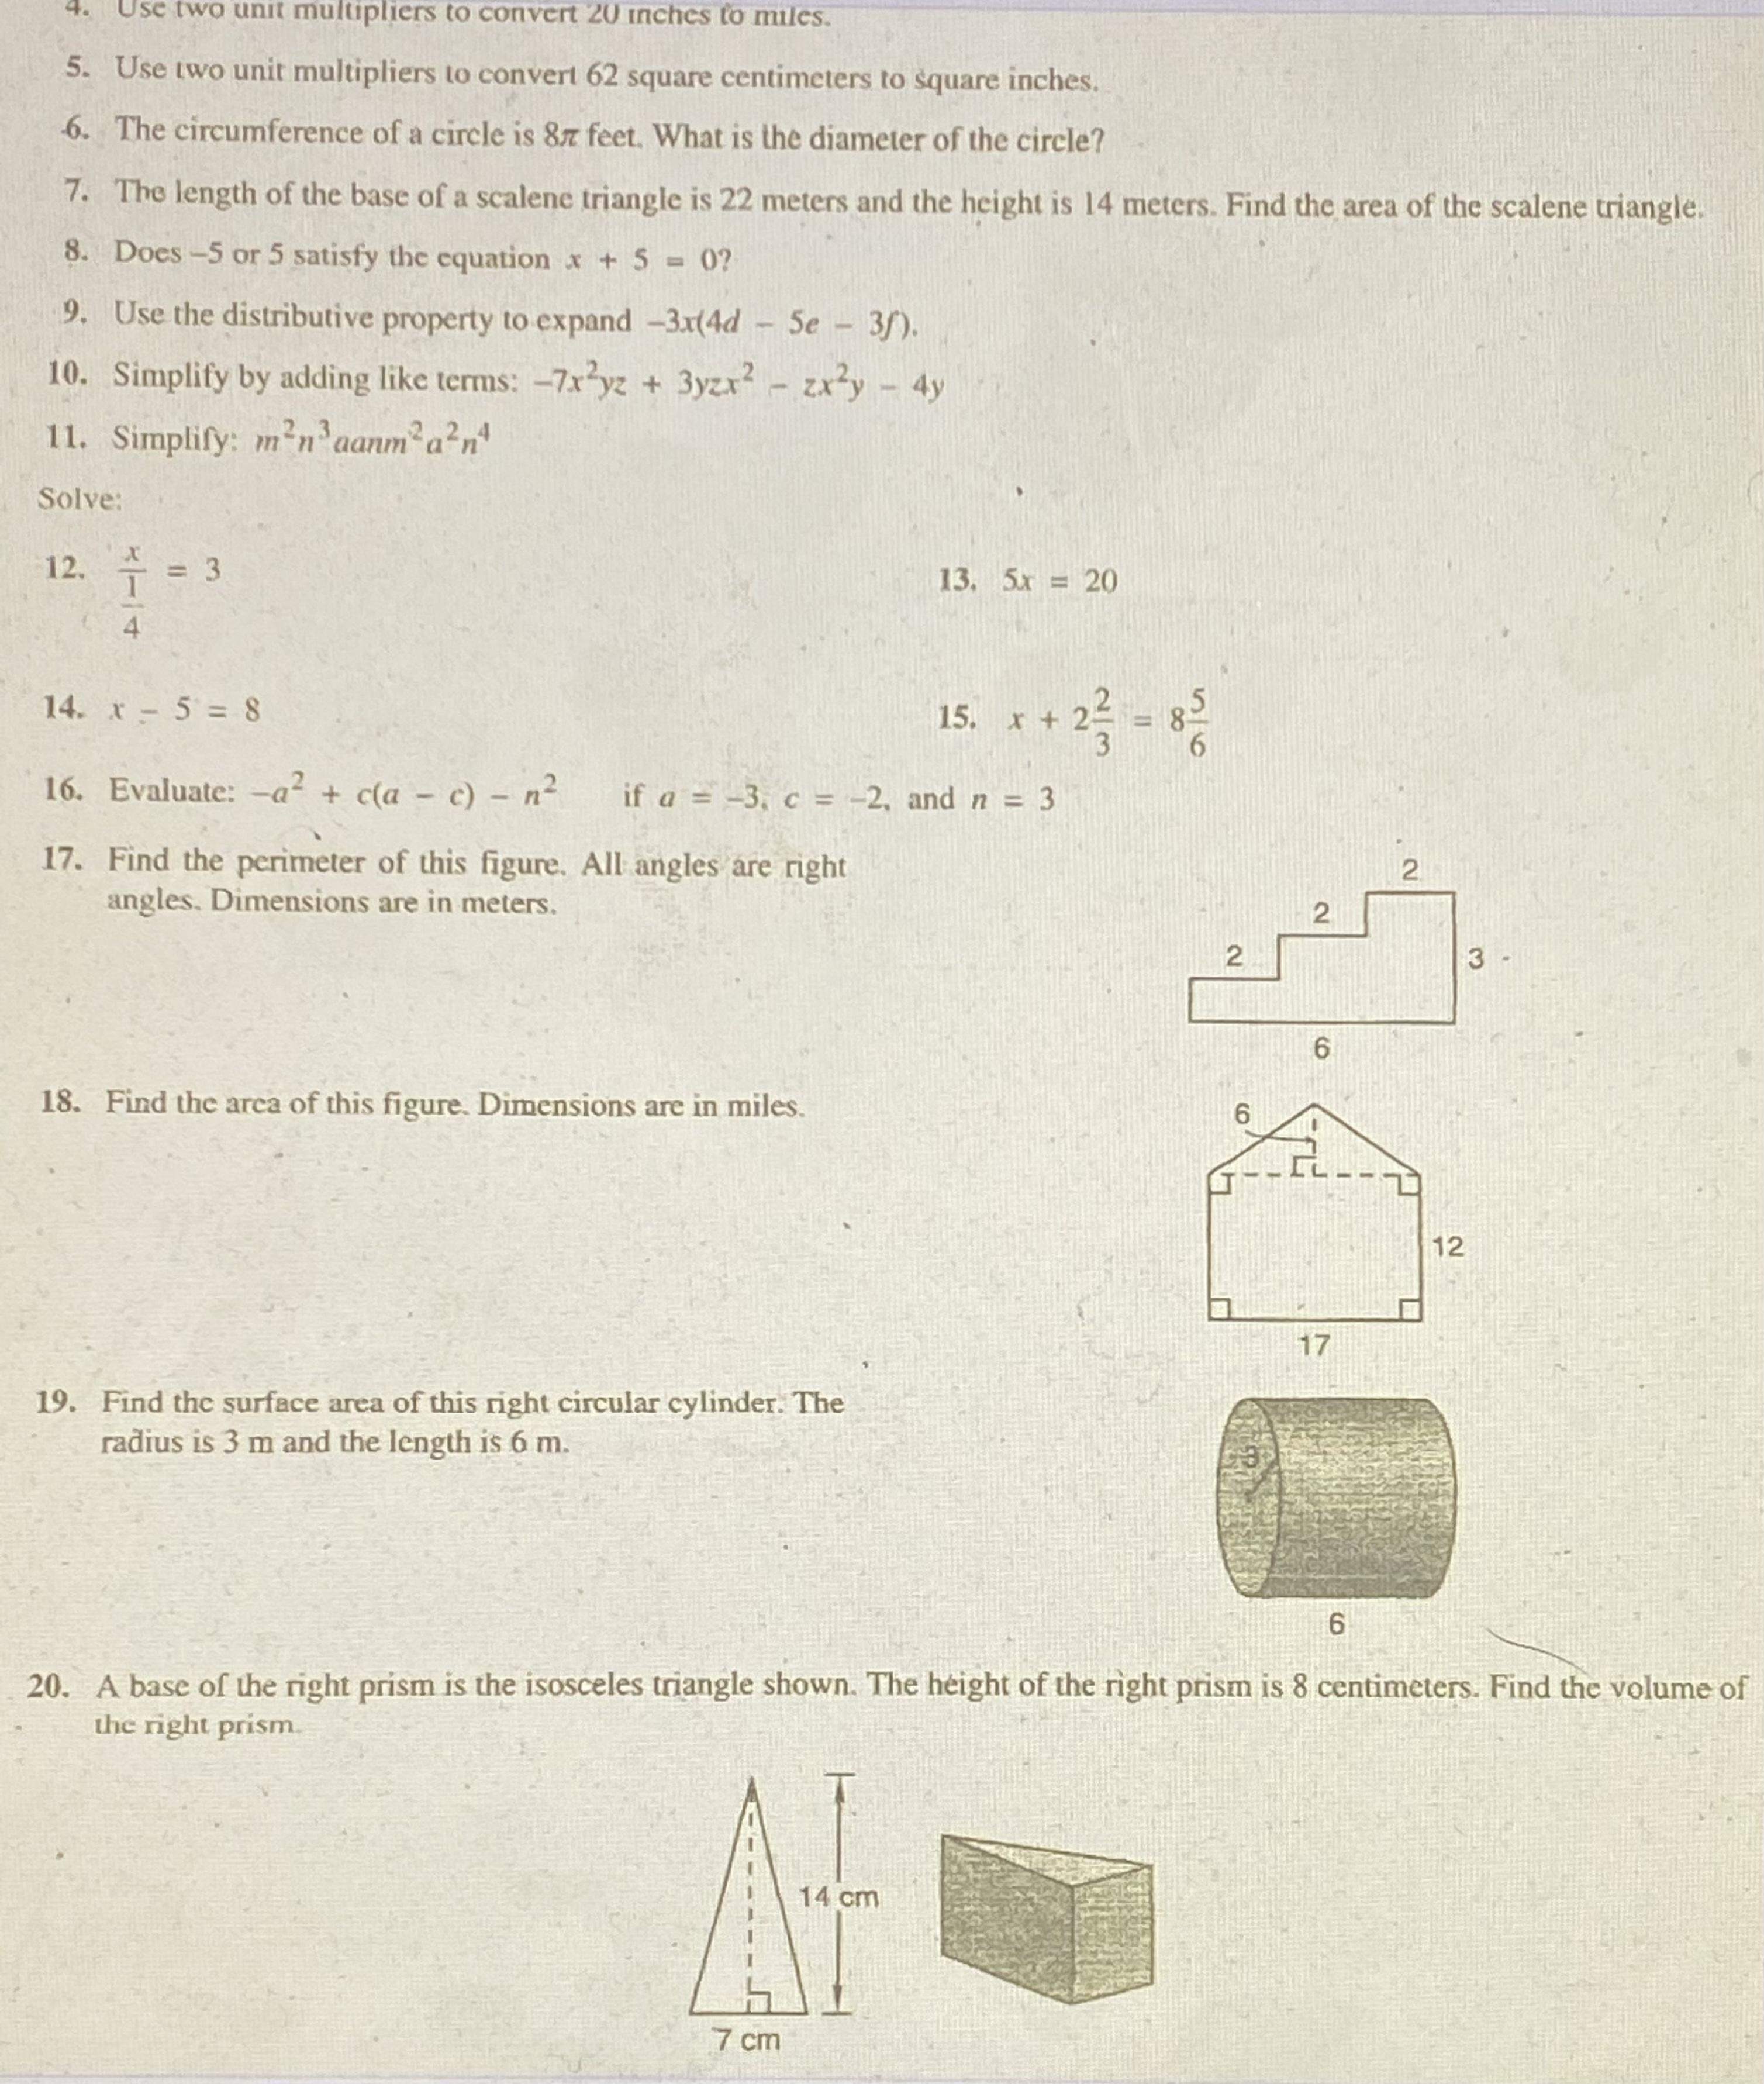 NEED HELP ON MATH TEST ASAP!! Will Give BRAINLY Must Show Work On All Problems!!